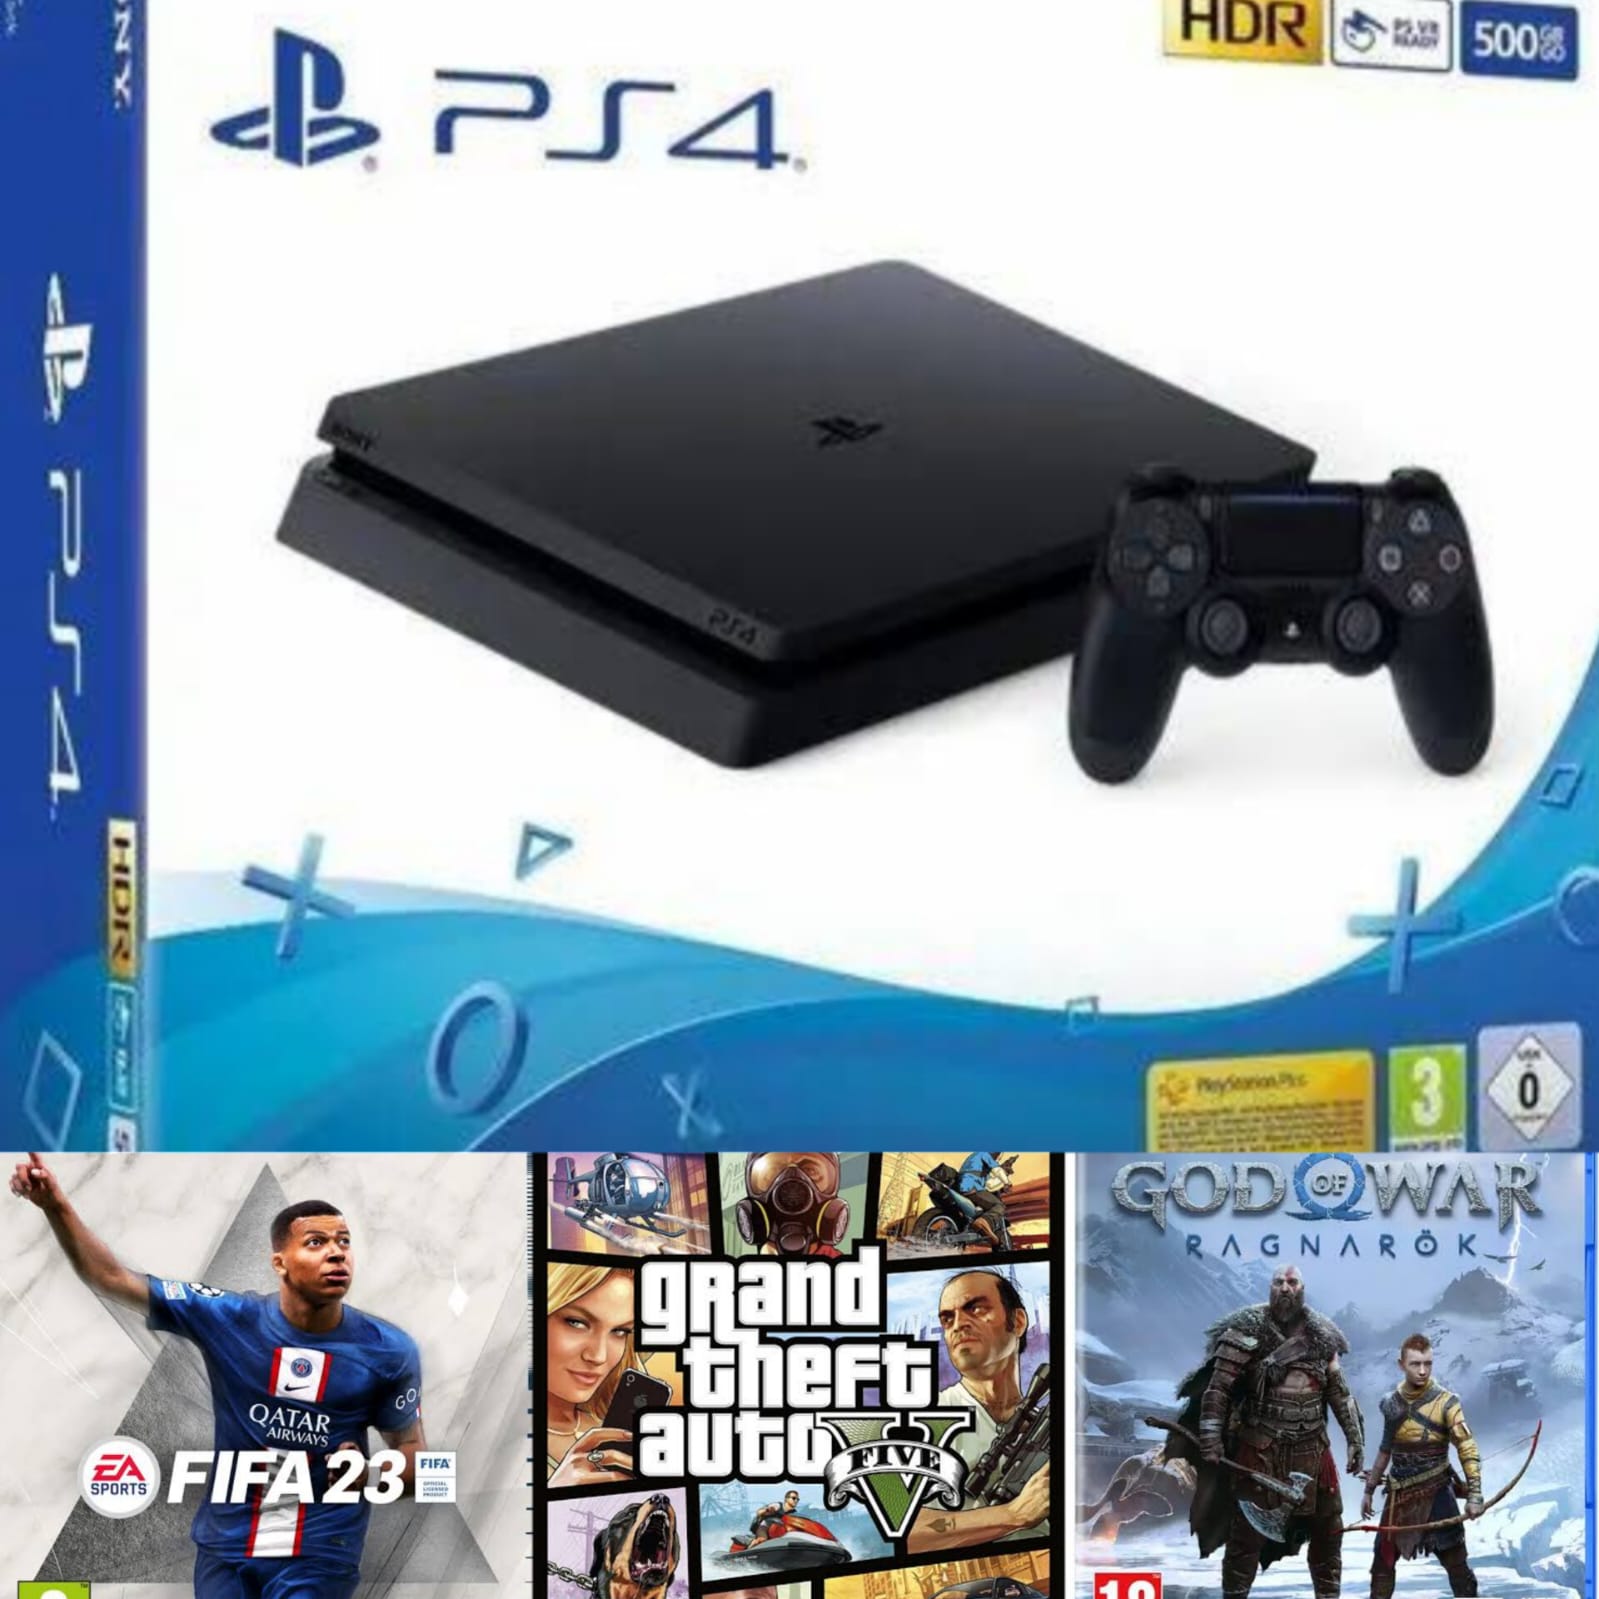 Sony PlayStation 4 500GB Game Console with GTA V and The Last of